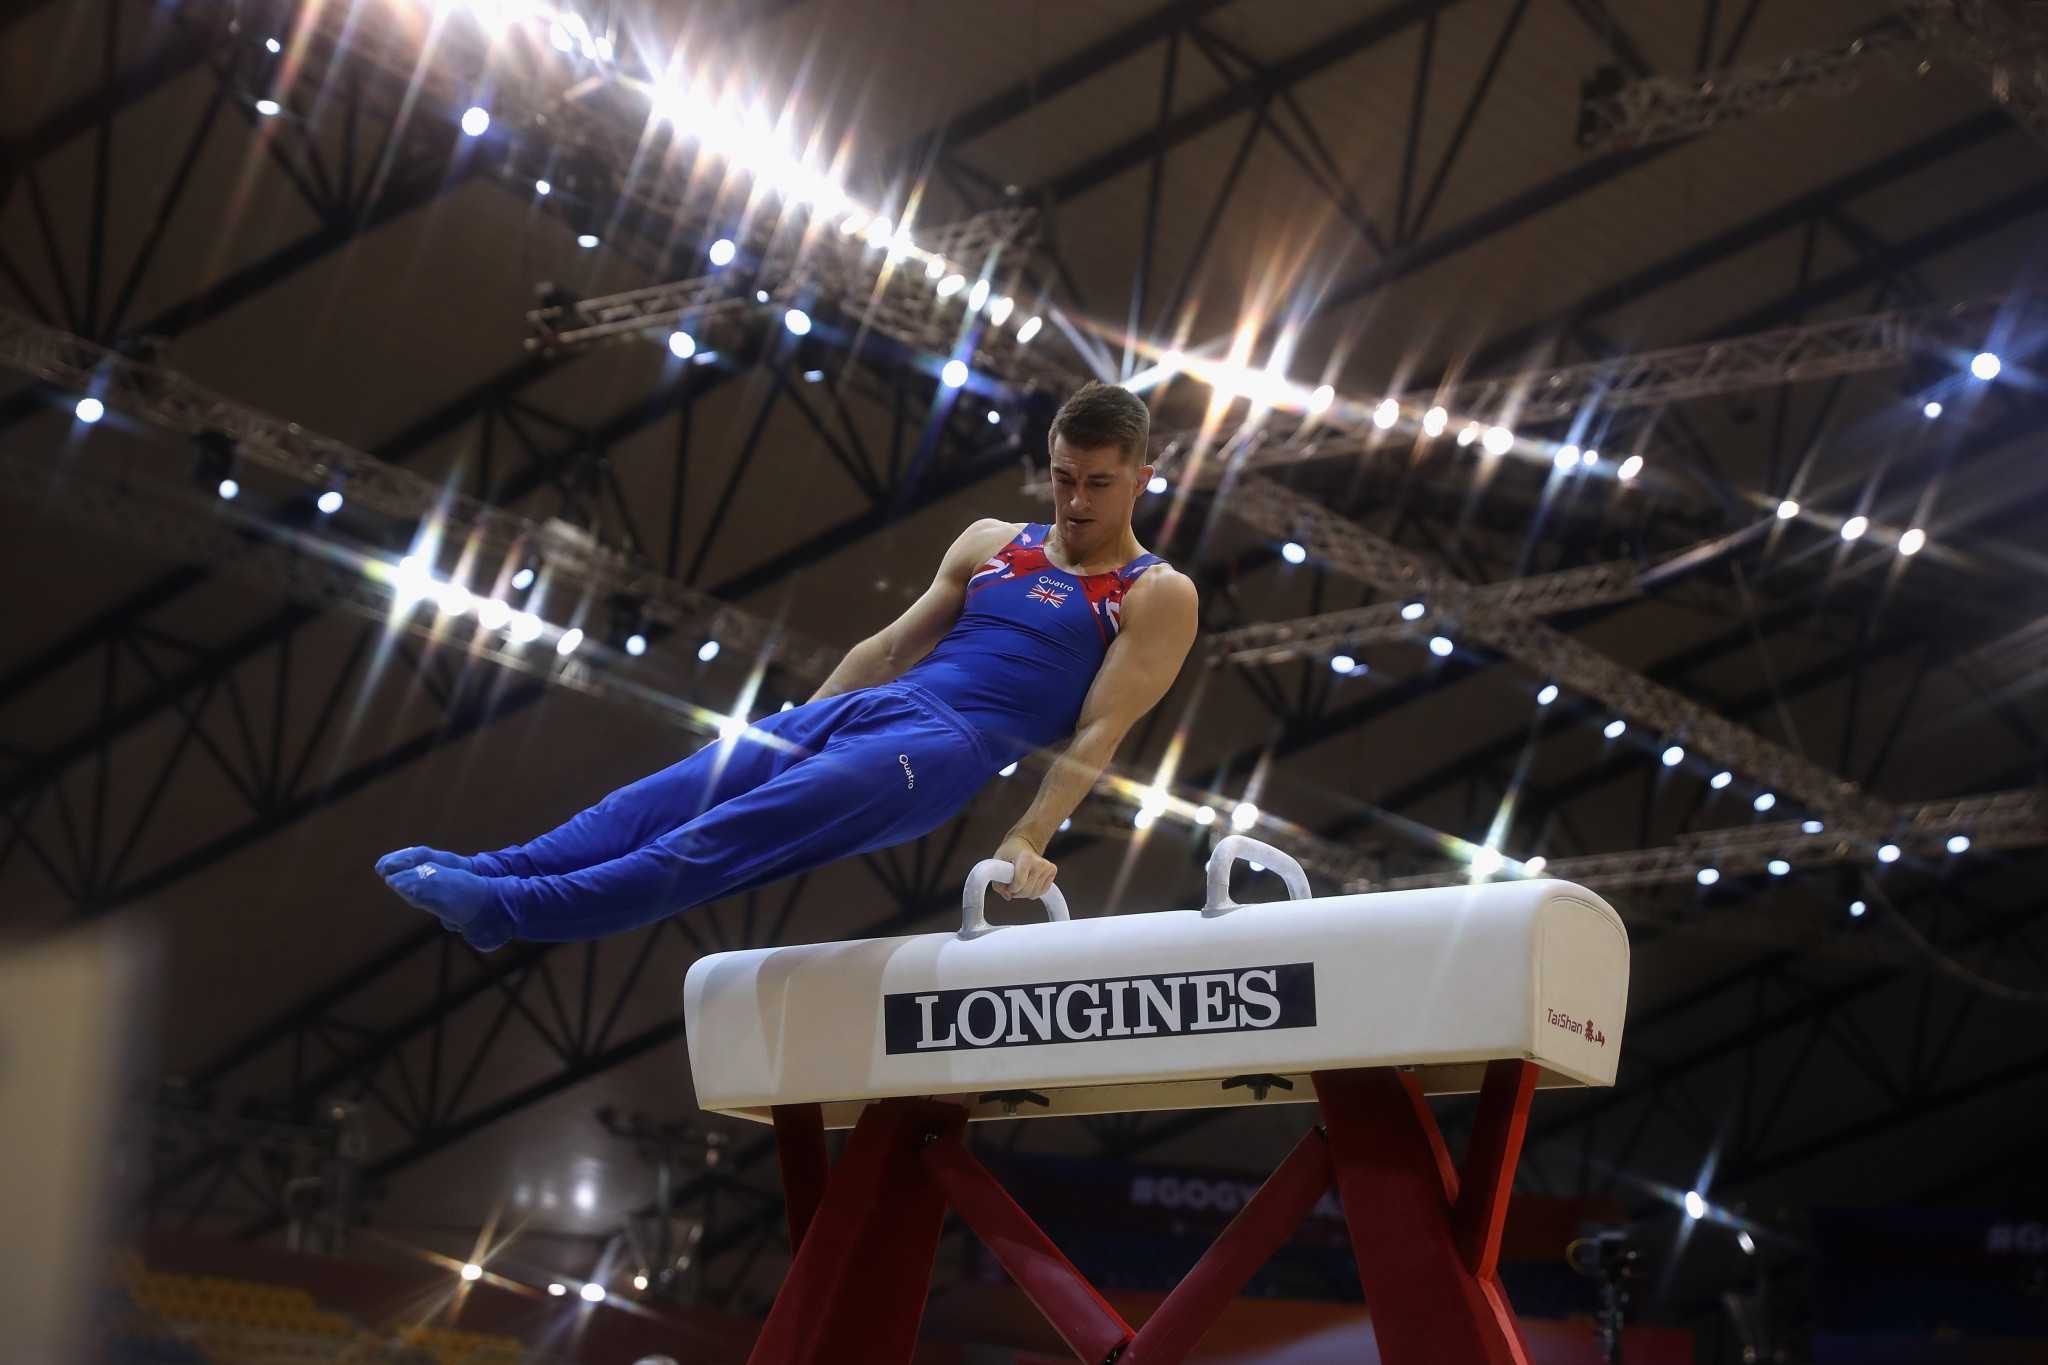 Britain's Max Whitlock qualified in top spot on his preferred pommel horse apparatus ©Getty Images